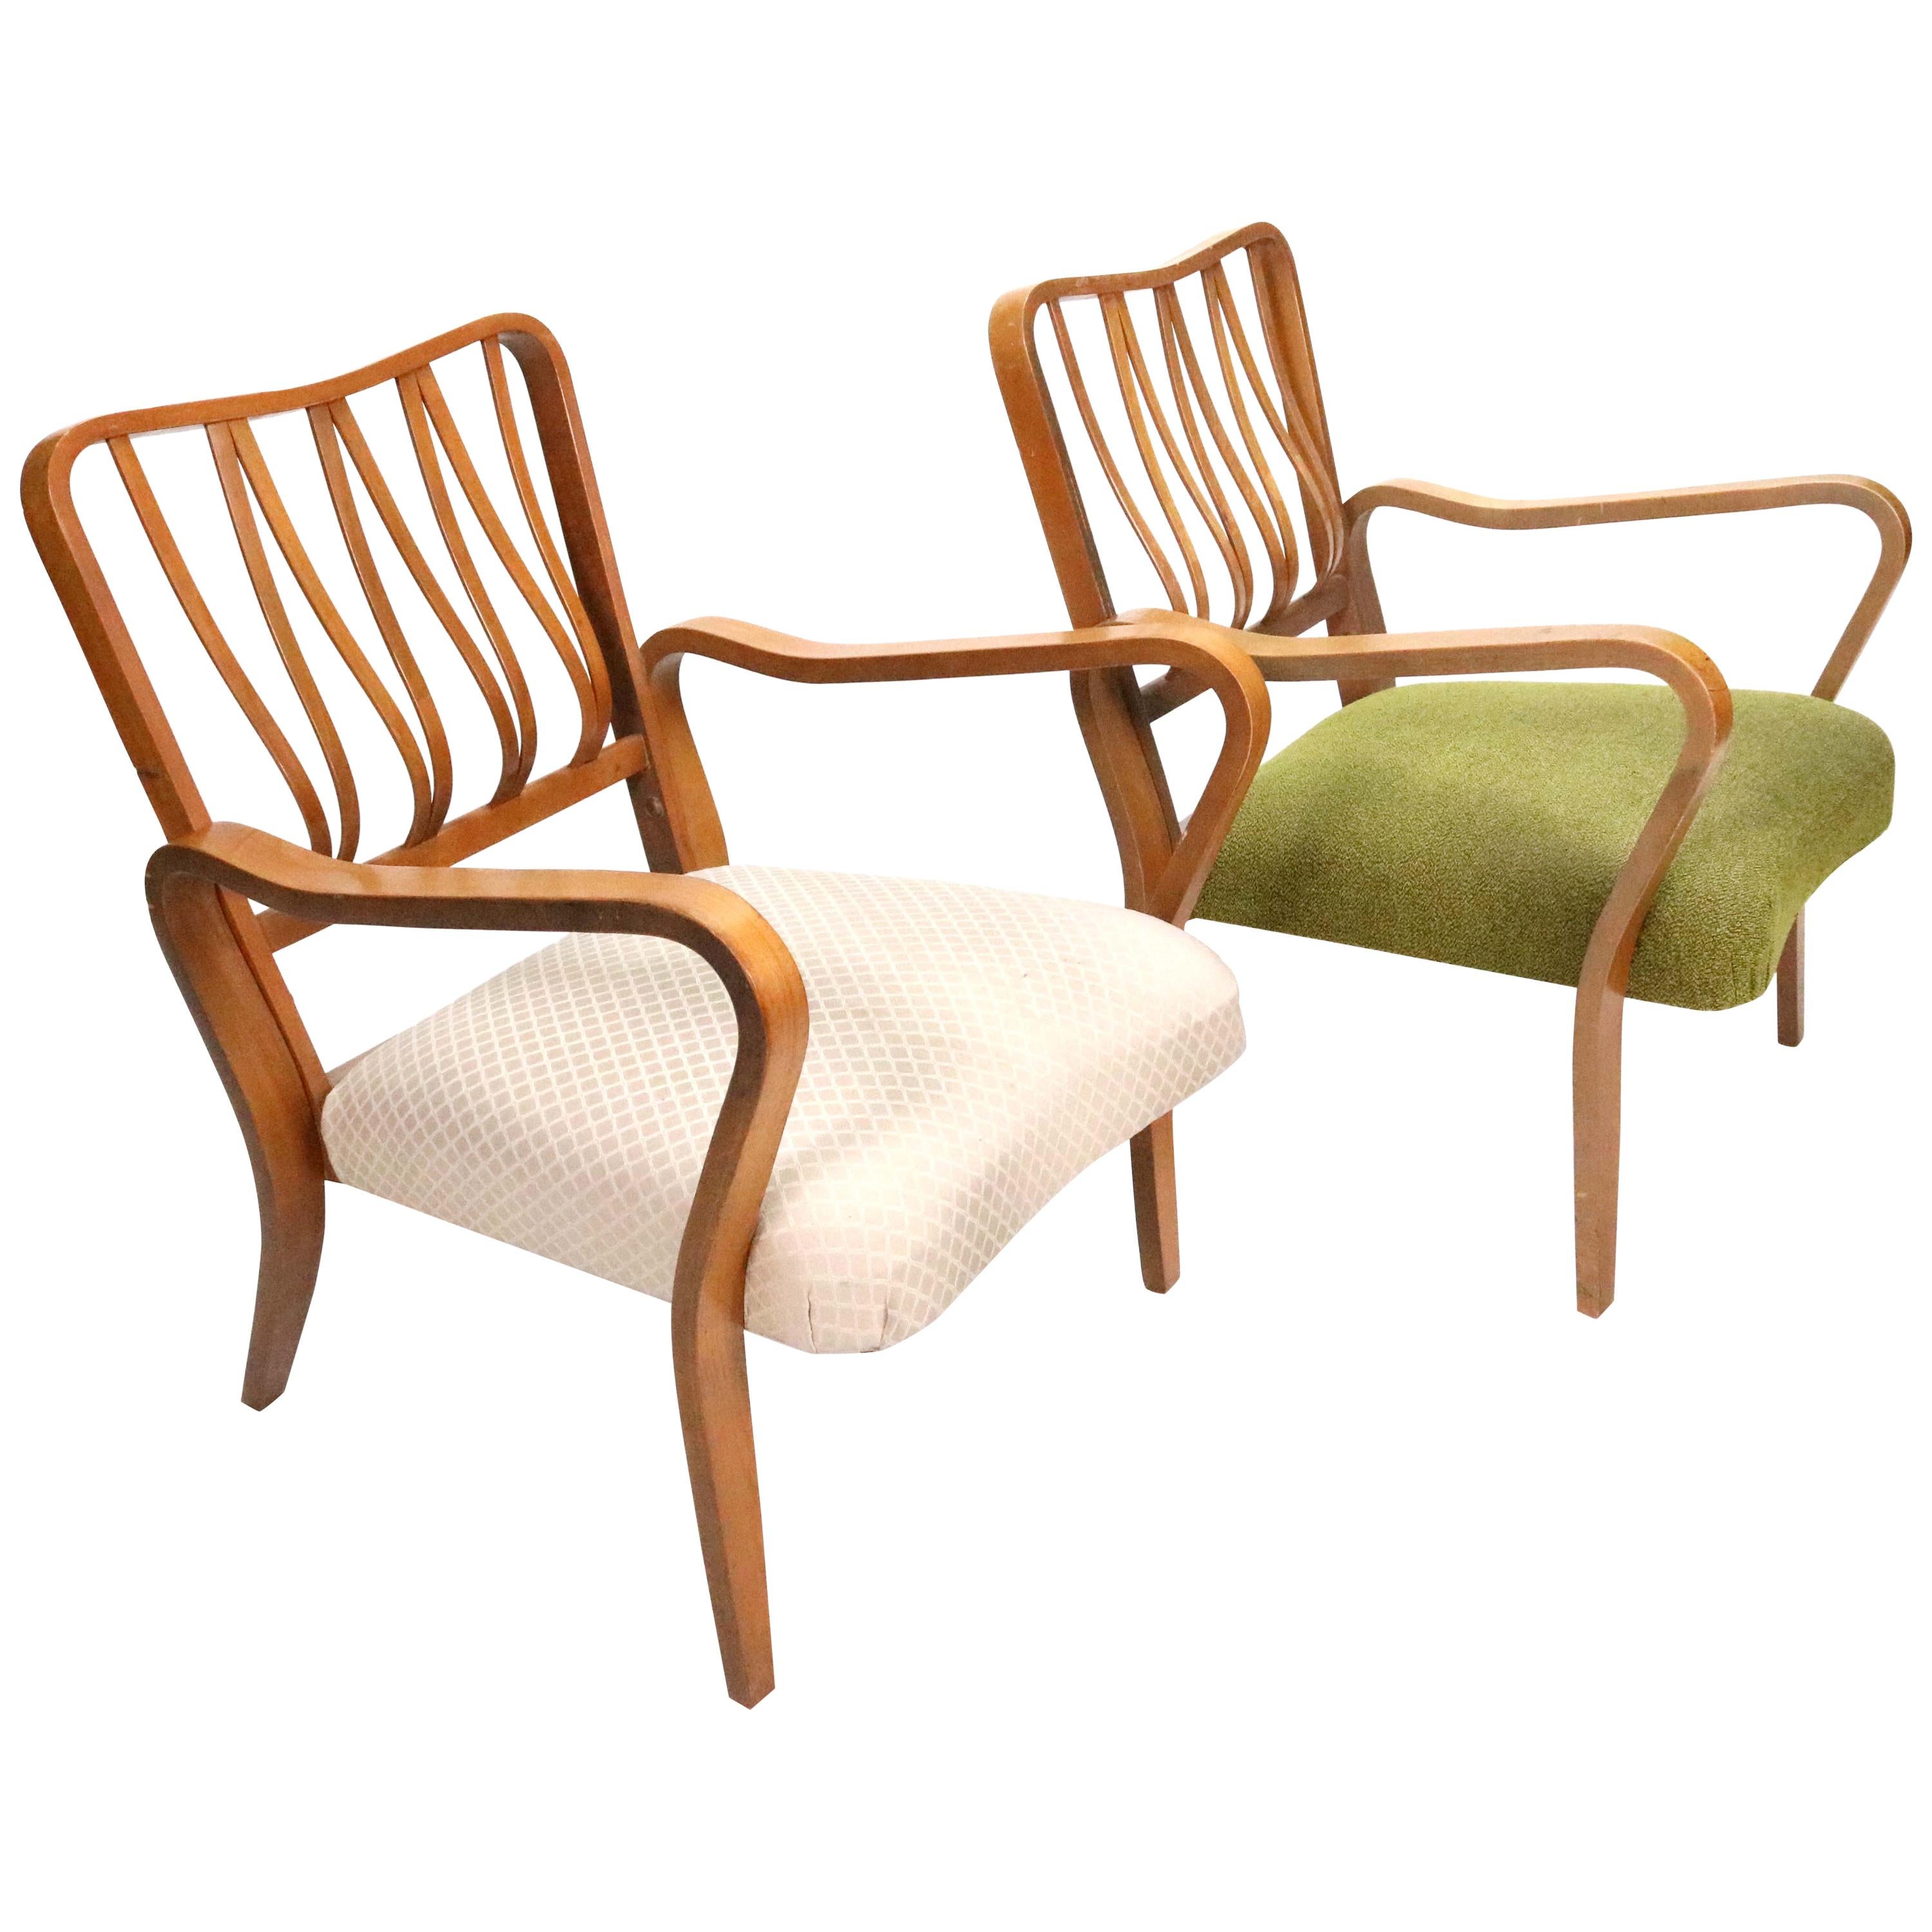 Pair of Linden Arm Chairs by G. A. Jenkins and Eric Lyons for Packet Furniture